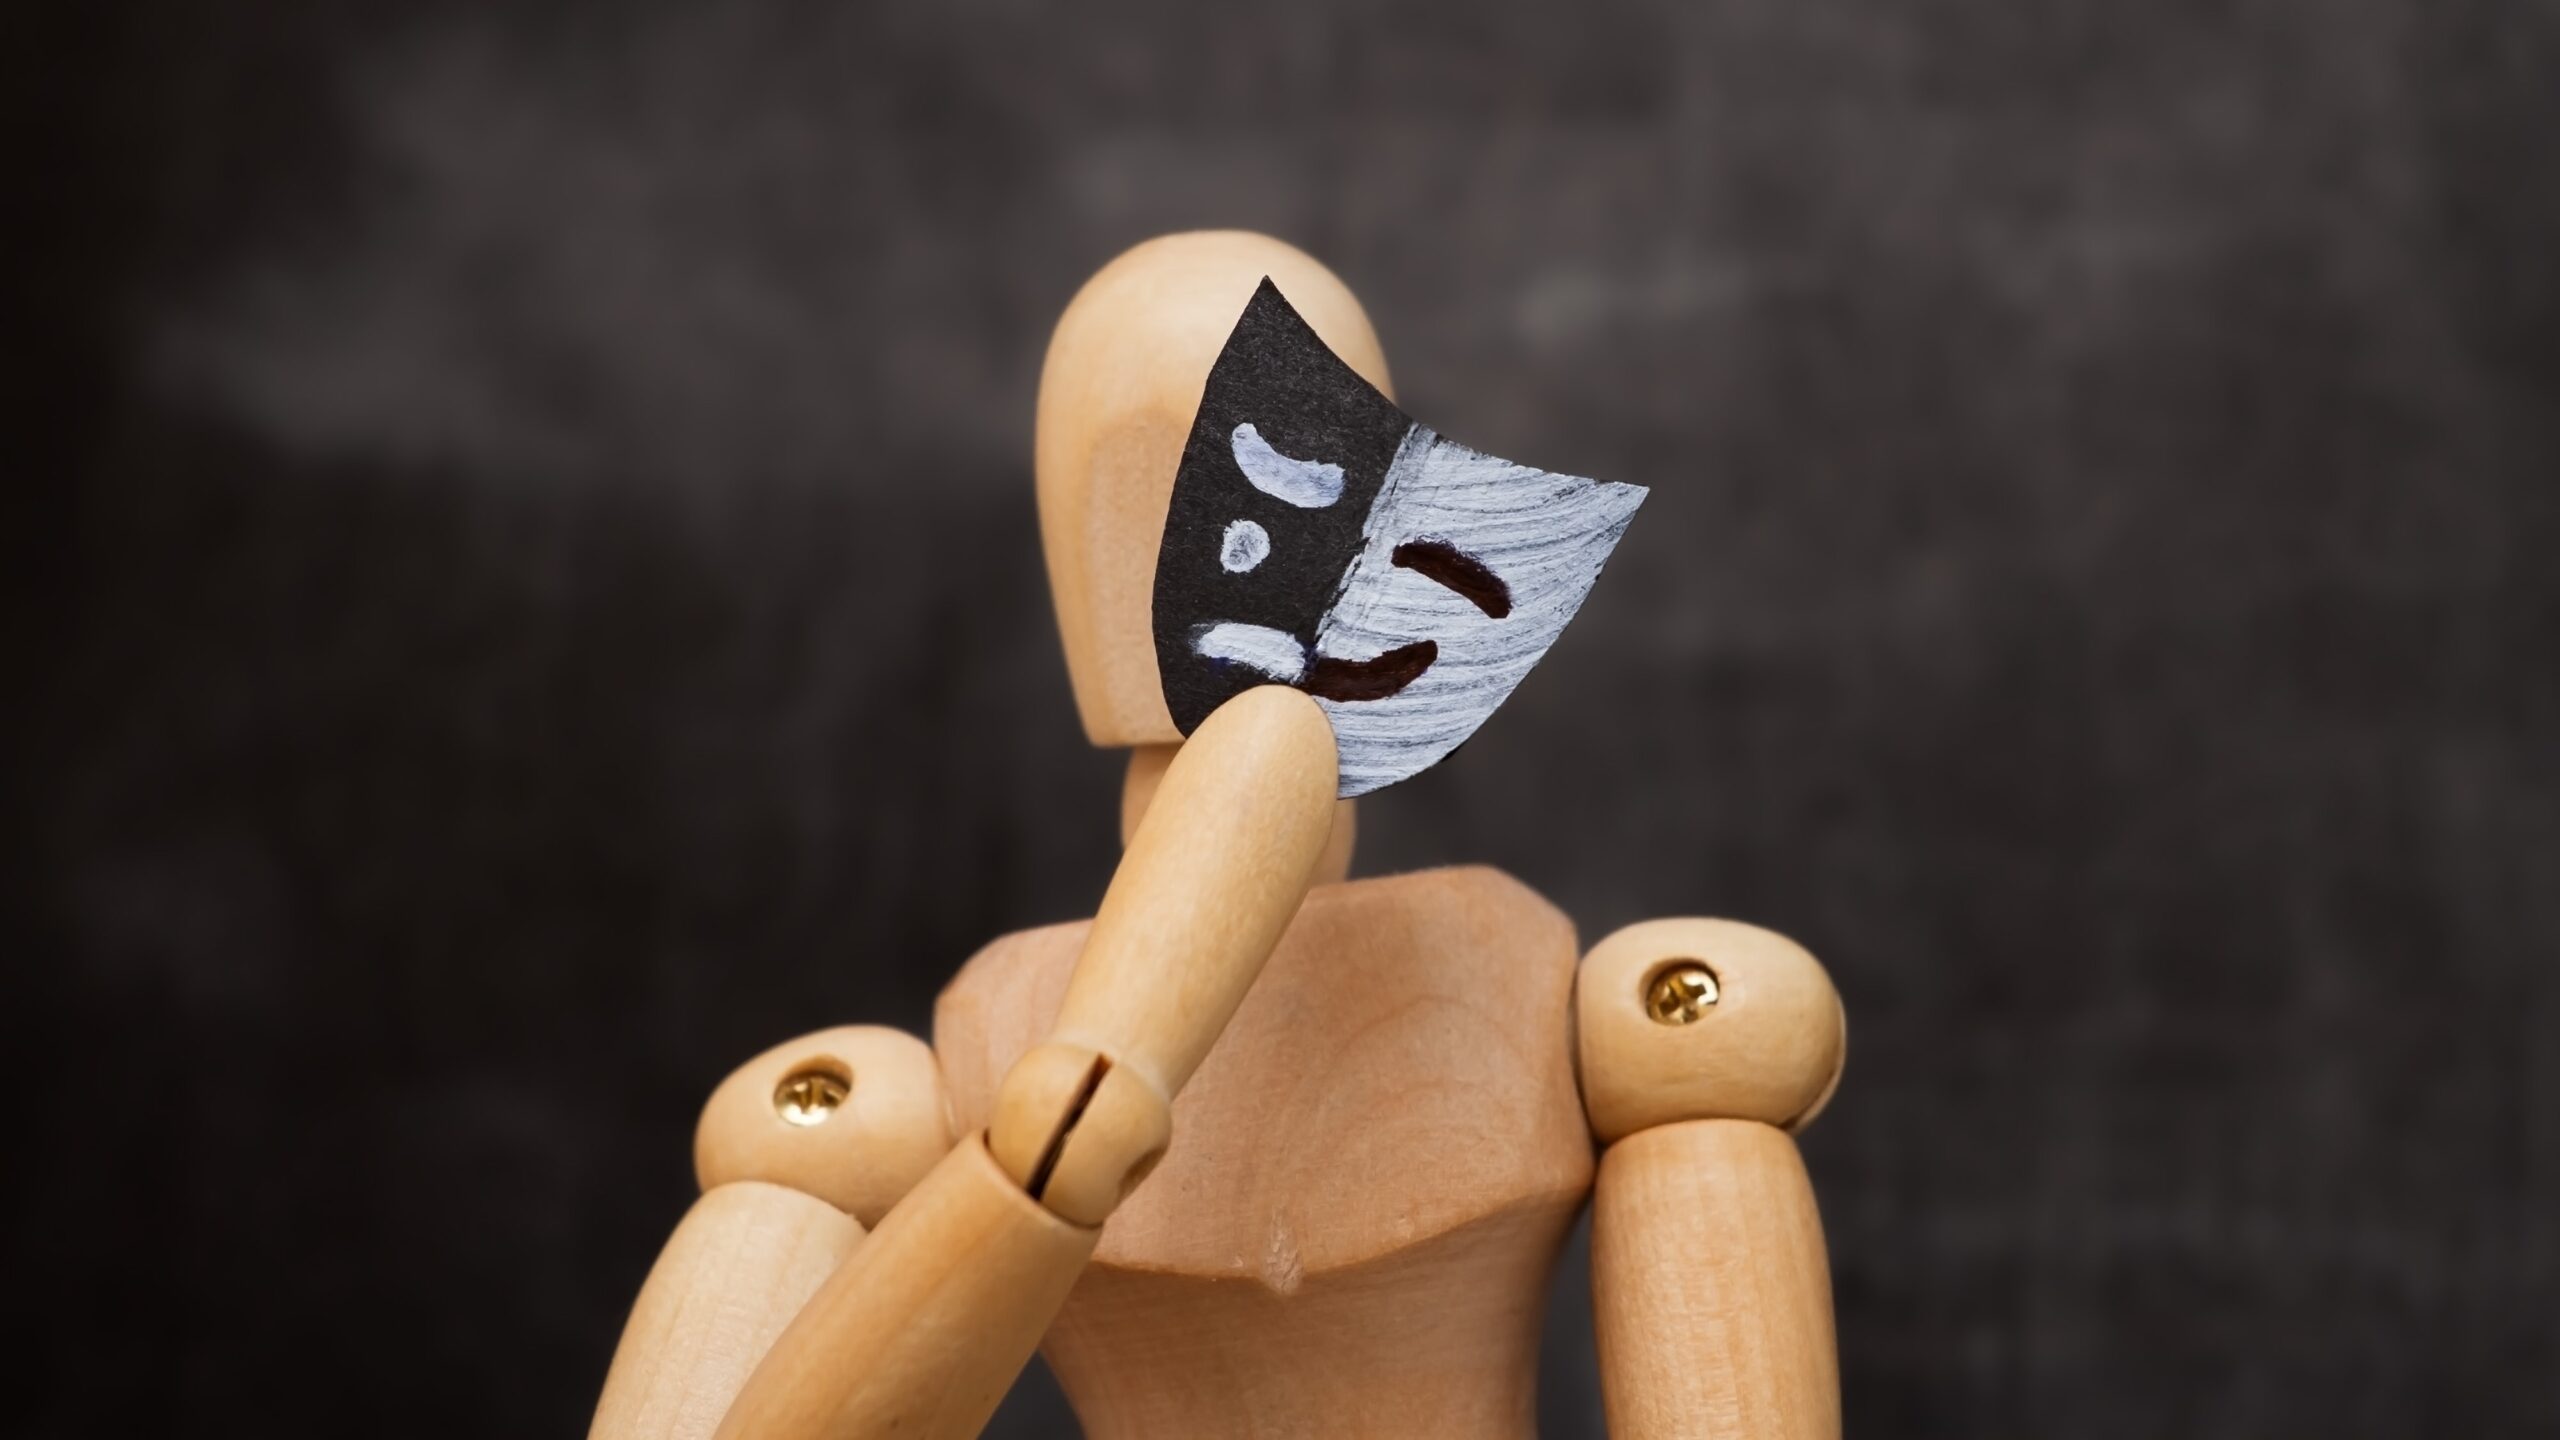 Imposter syndrome concept image: A wooden figure holding a mask over its face.